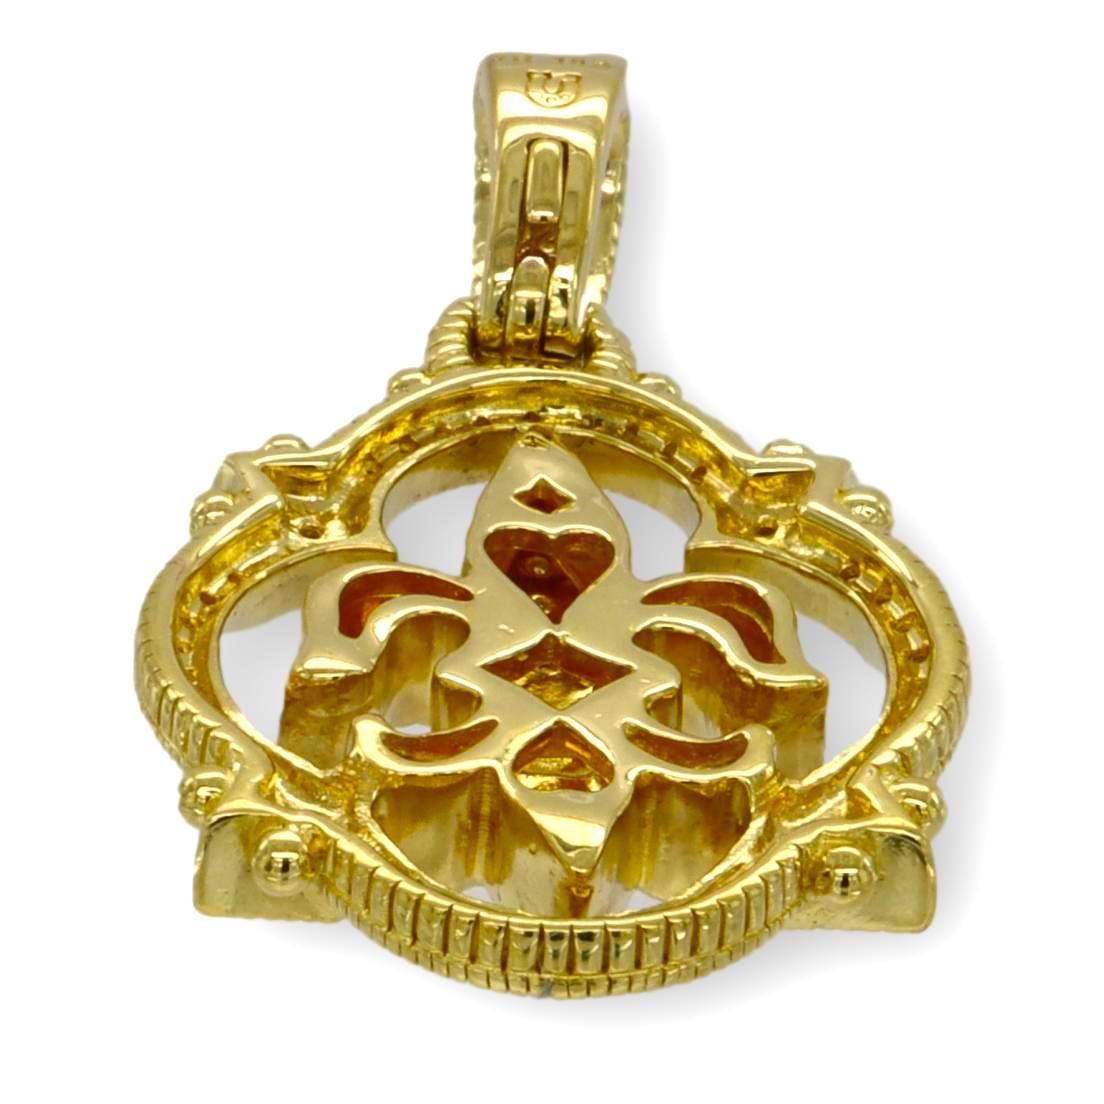 Judith Ripka Fleur De Lis Pendant finely crafted in 18k Yellow Gold featuring 56 round brilliant cut diamonds weighing 0.56 cts total weight featuring an open oval shape floral design with a Fleur de Lis symbol in the center, all decorated with